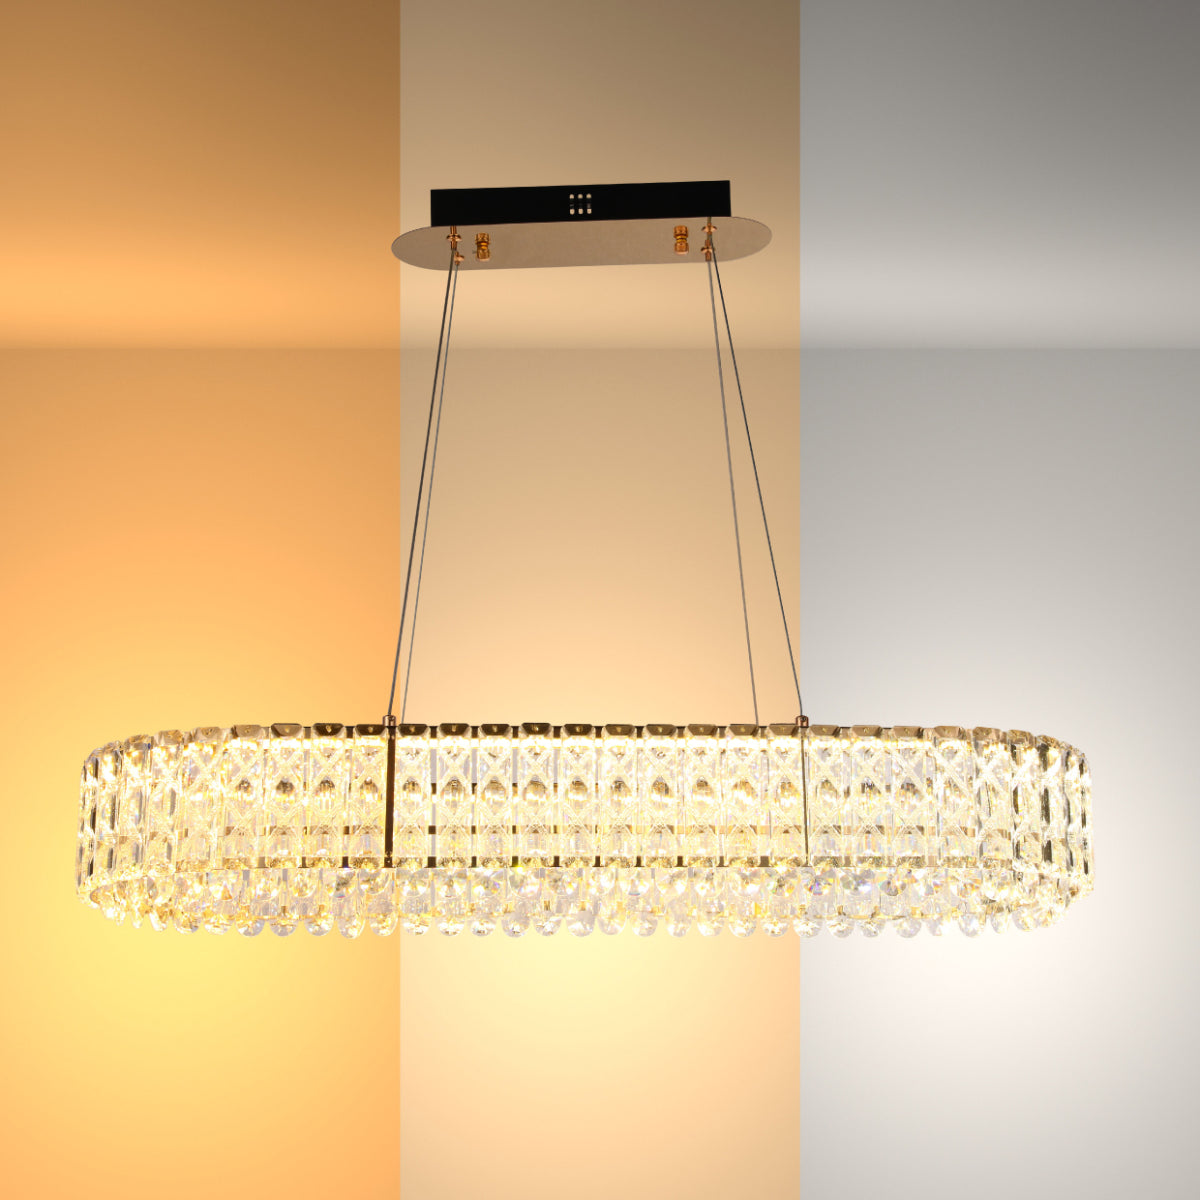 Main image of Crystal Gold Pendant Chandelier Light with Remote Control 159-18217